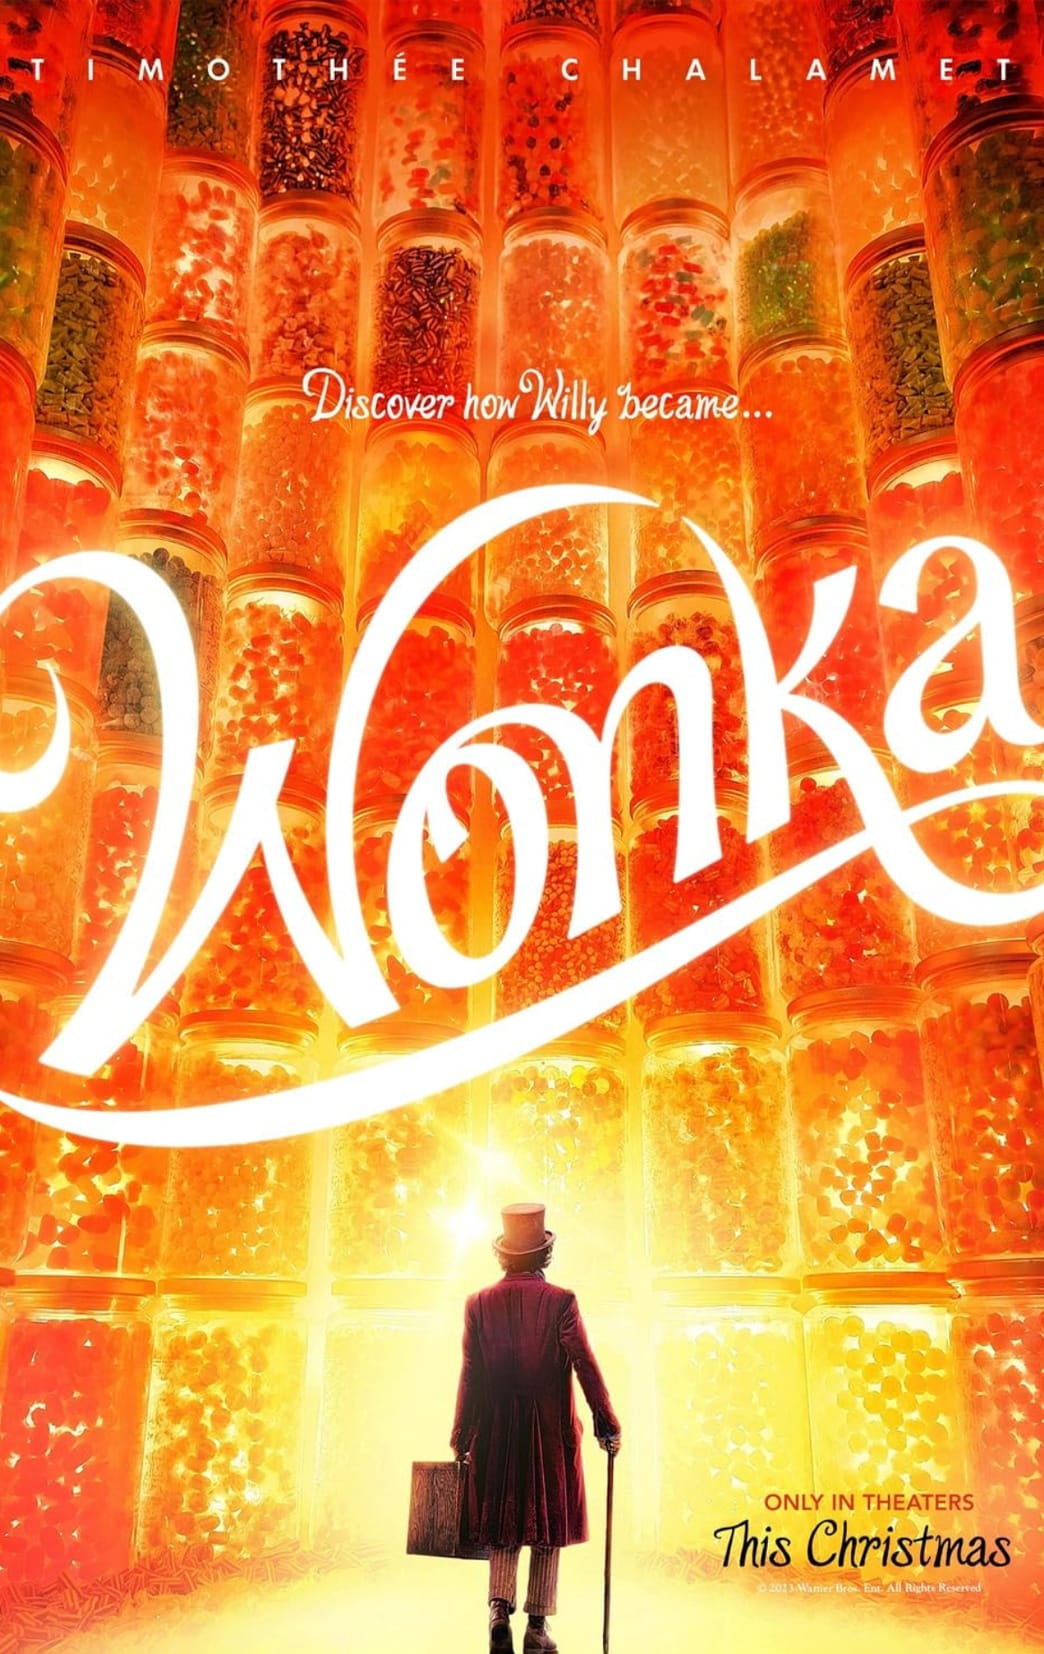 A poster for the movie wonka.